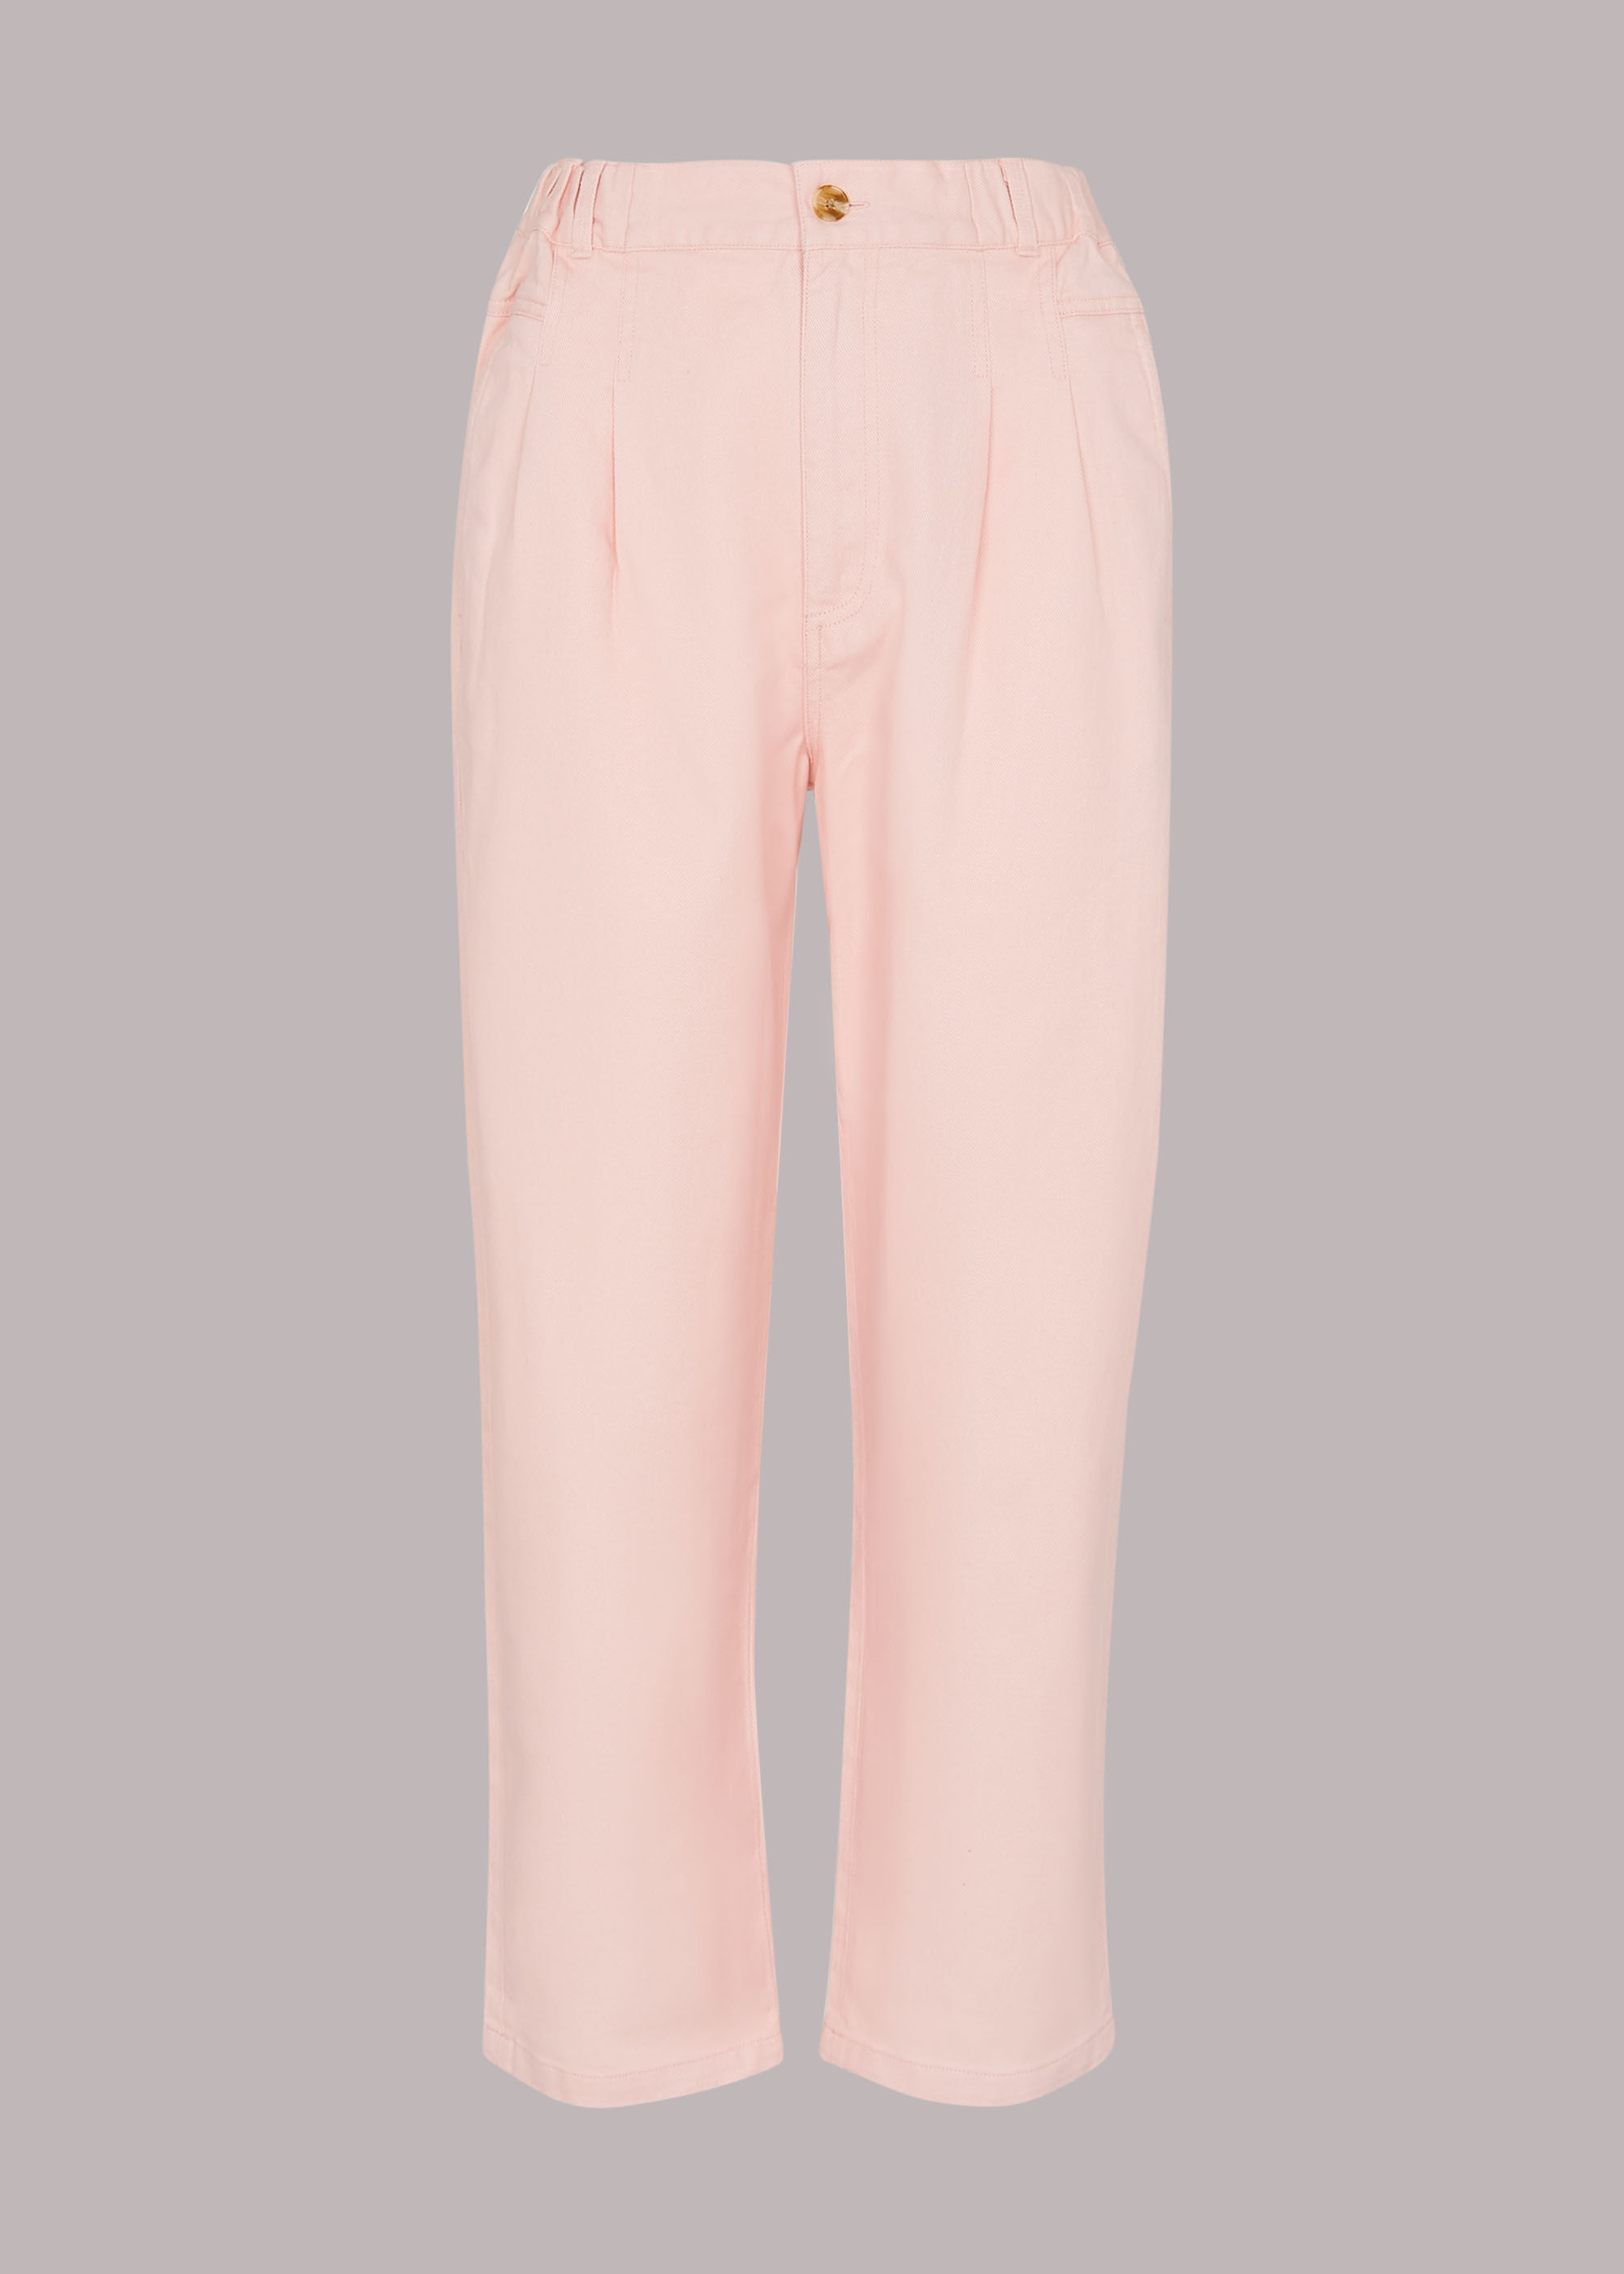 Cotton wide leg trousers with high waist and multiple pockets length  295 pale pink La Redoute Collections  La Redoute